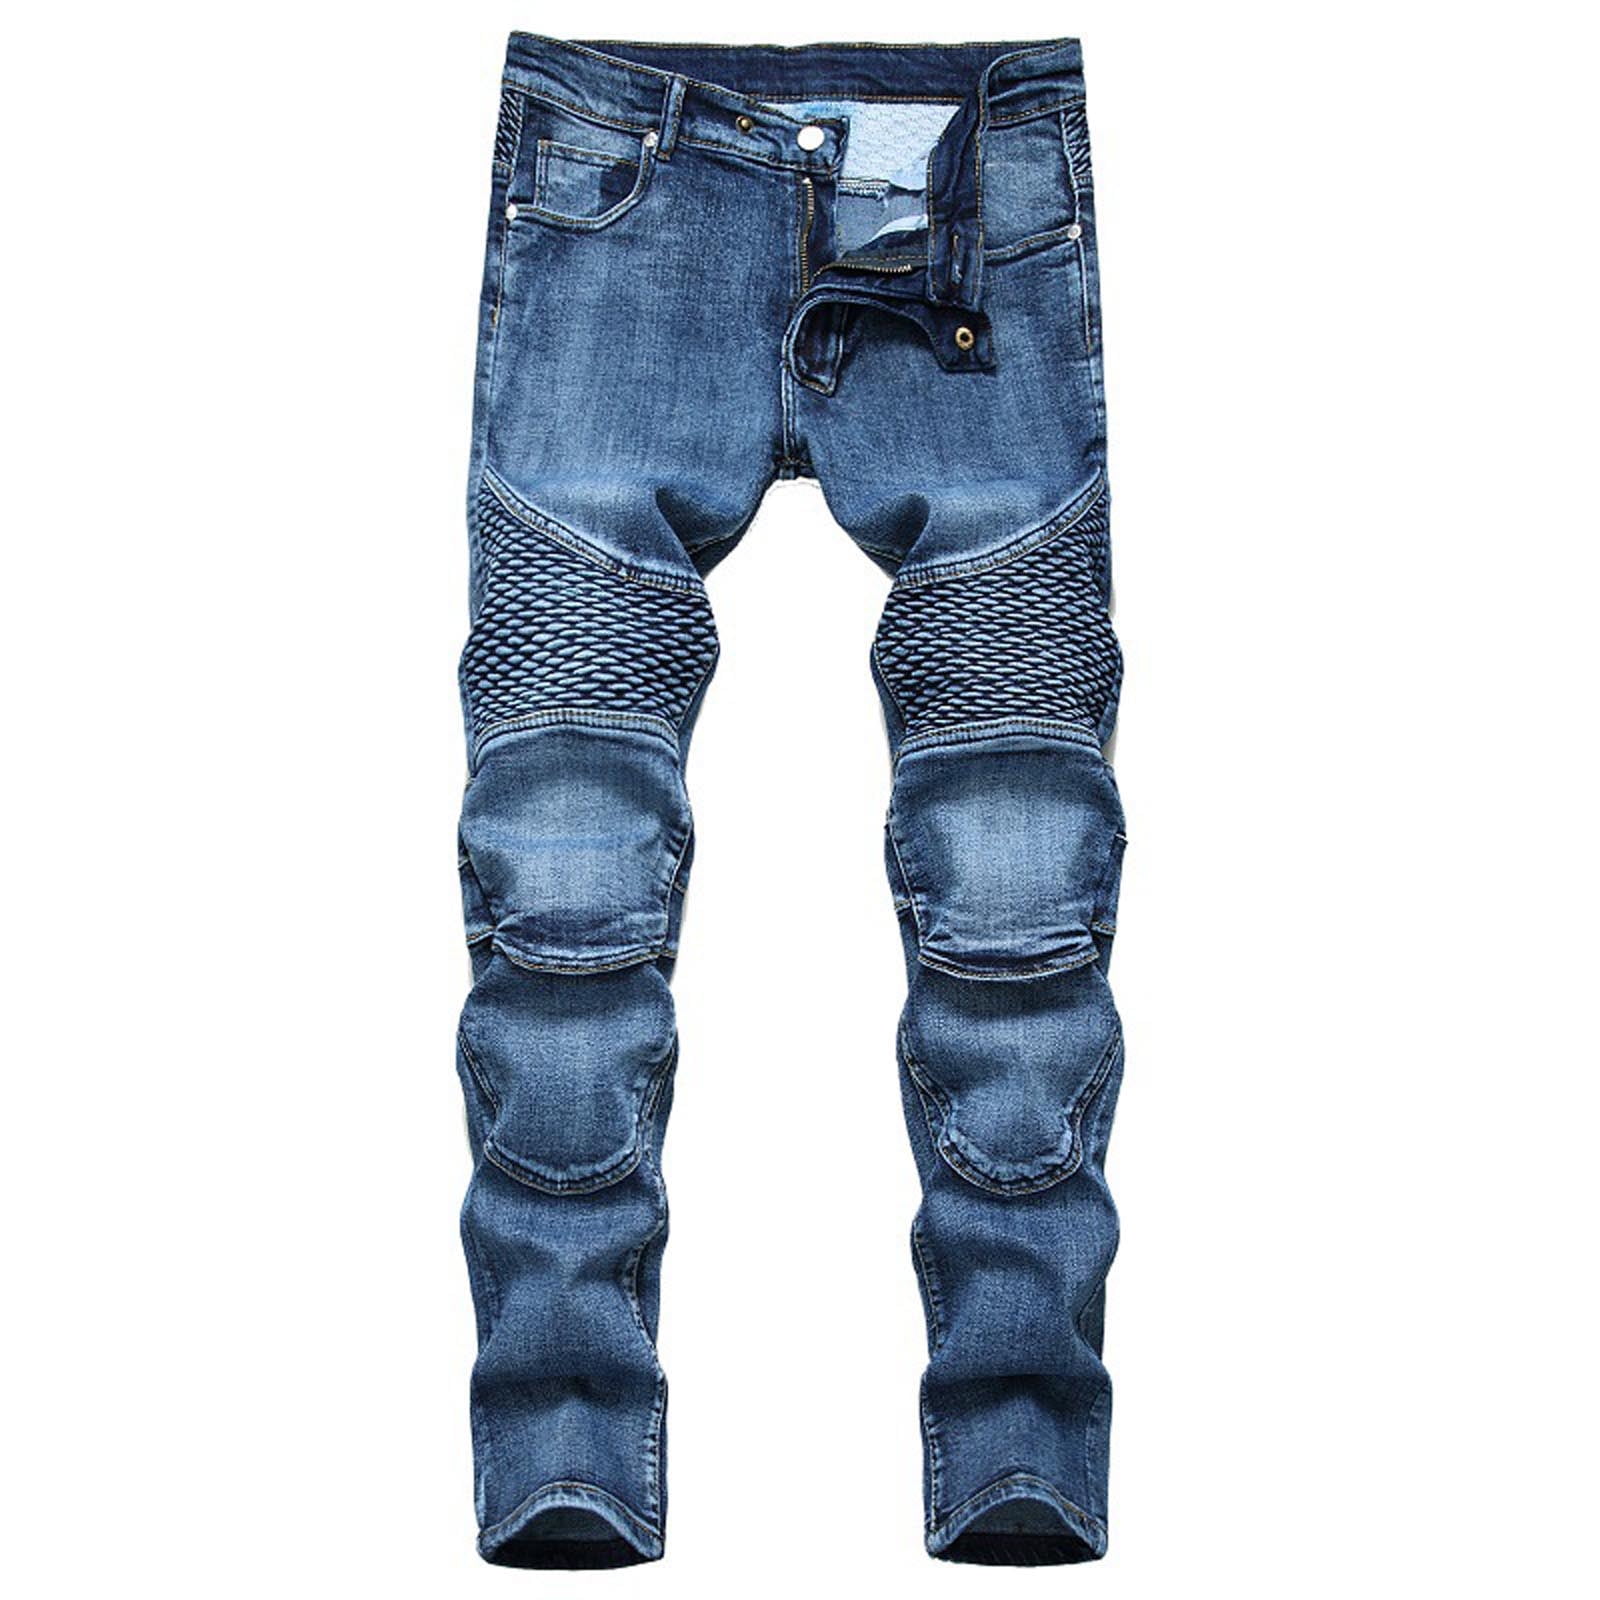 Yievot Mens Jean Clearance Old Denim Pants Have Pockets Button Zipper  Personality Straight Leg Trousers Blue Large Sizes